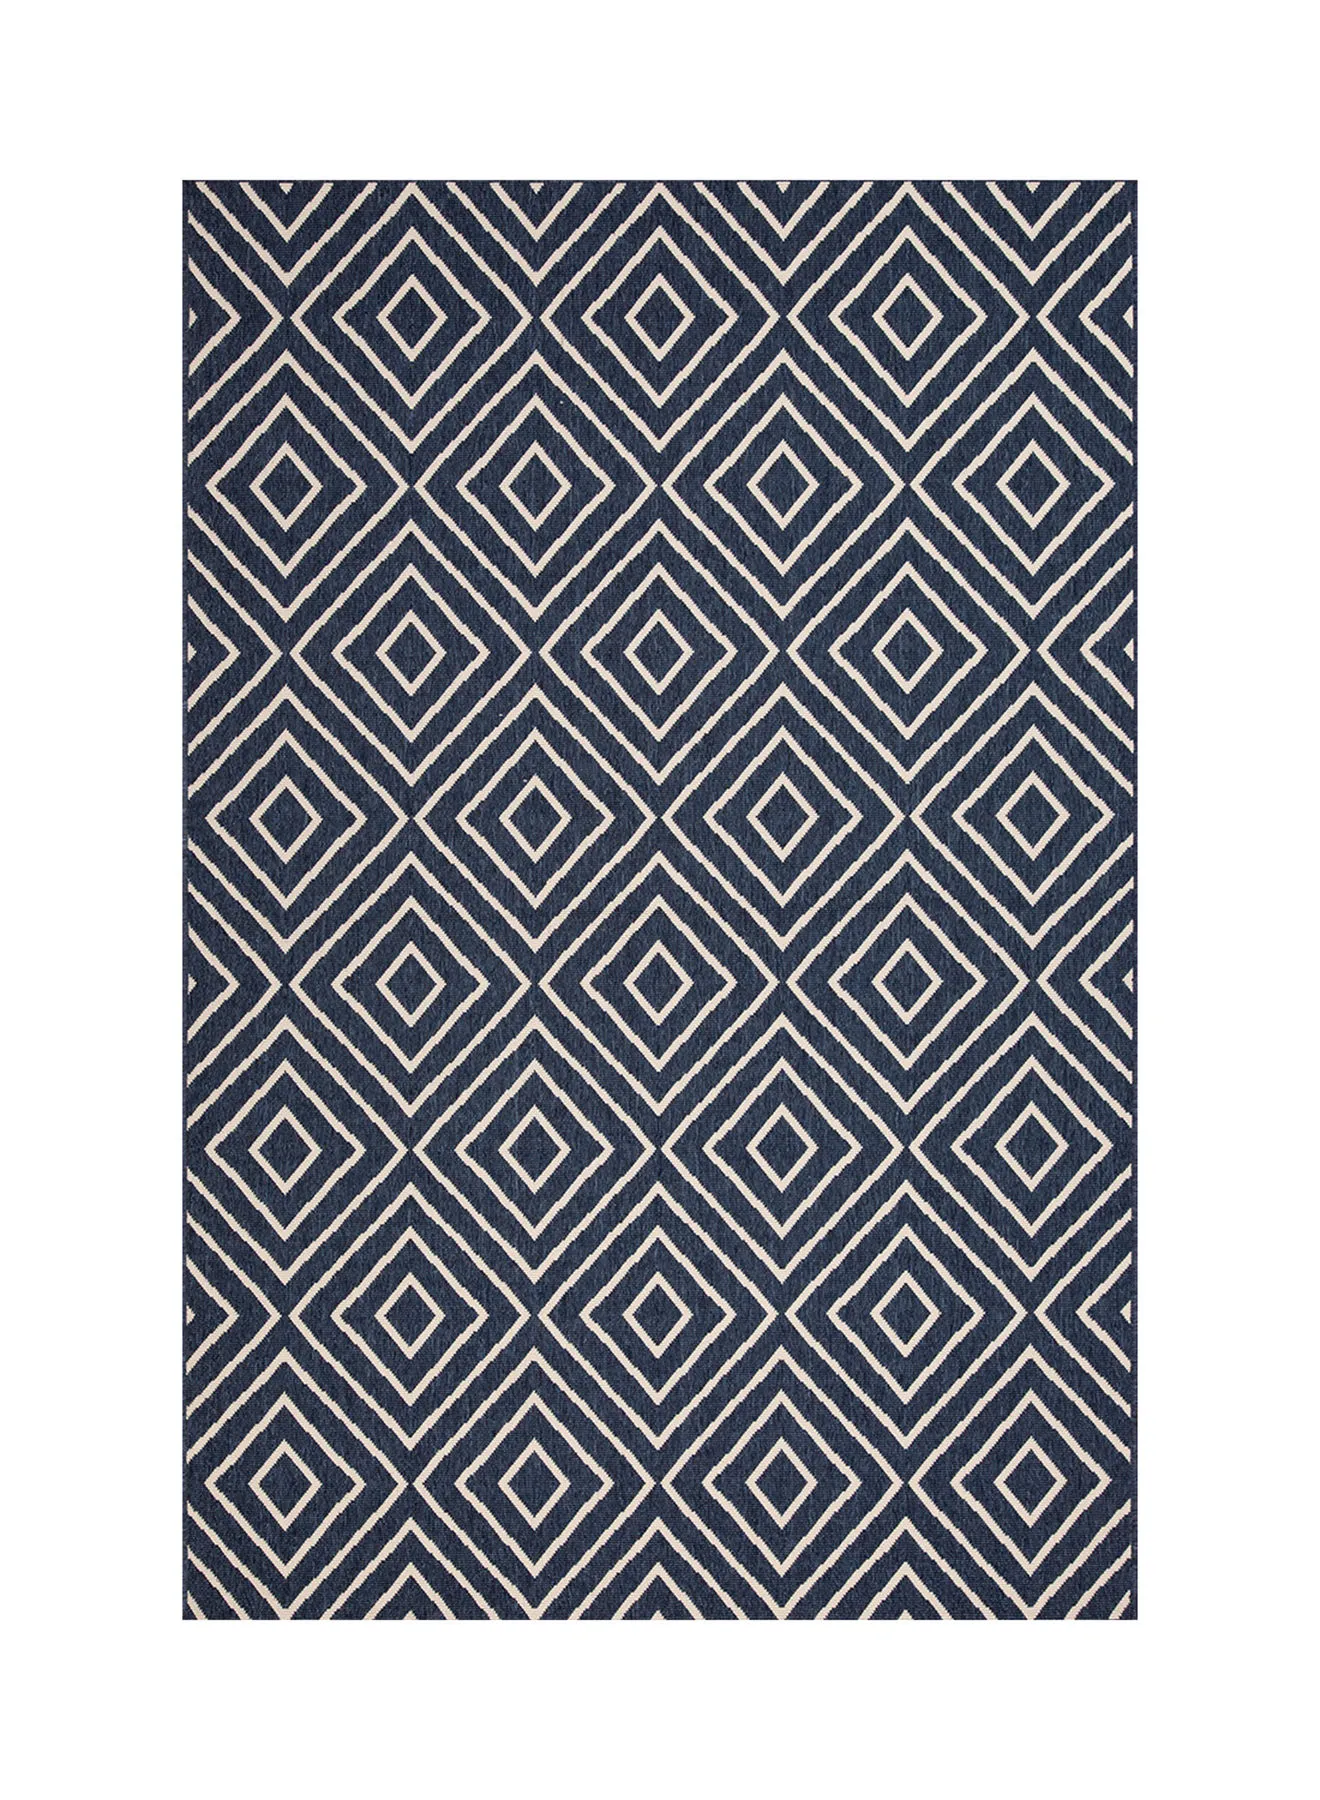 ebb & flow L. Tributary Outdoor Unique Luxury Quality Material Carpet For The Perfect Stylish Home 1053B Blue/White 280 x 380cm